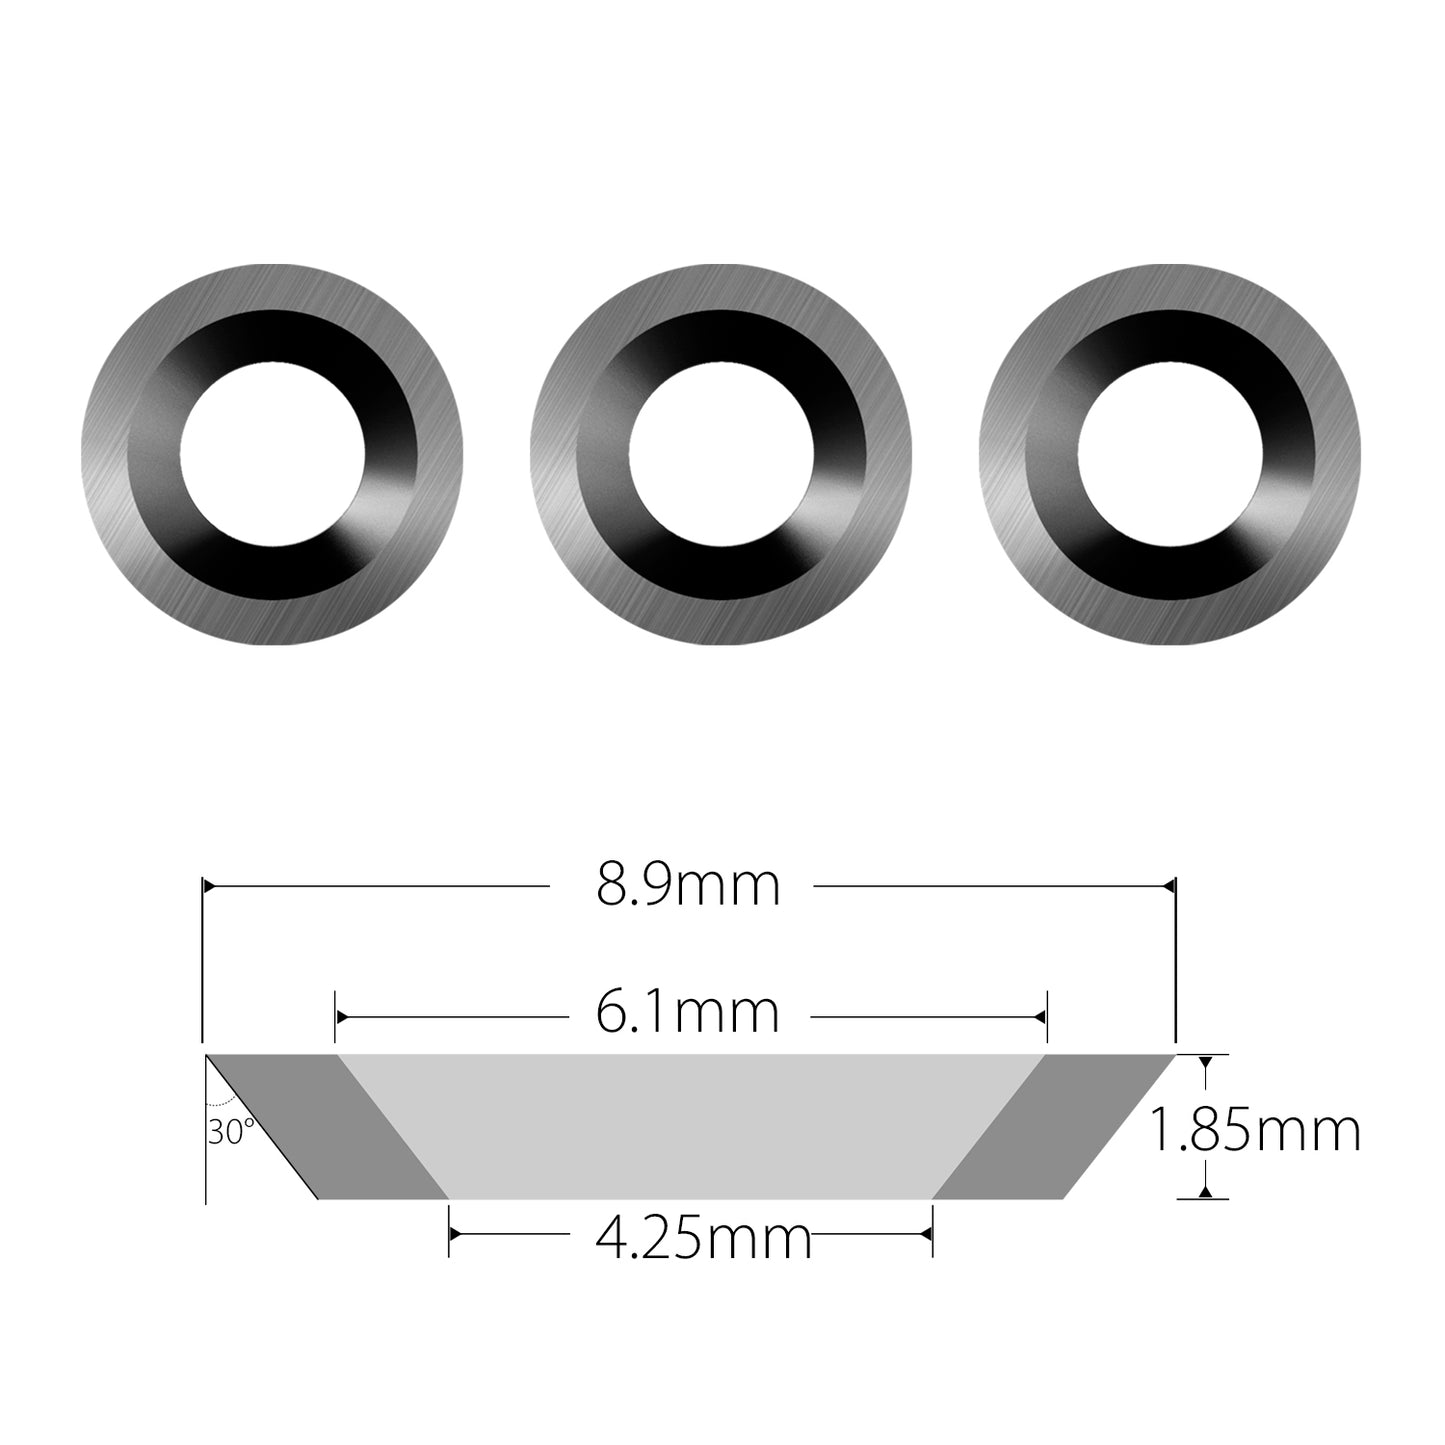 the size of 8.9 x 1.85 mm round carbide insert